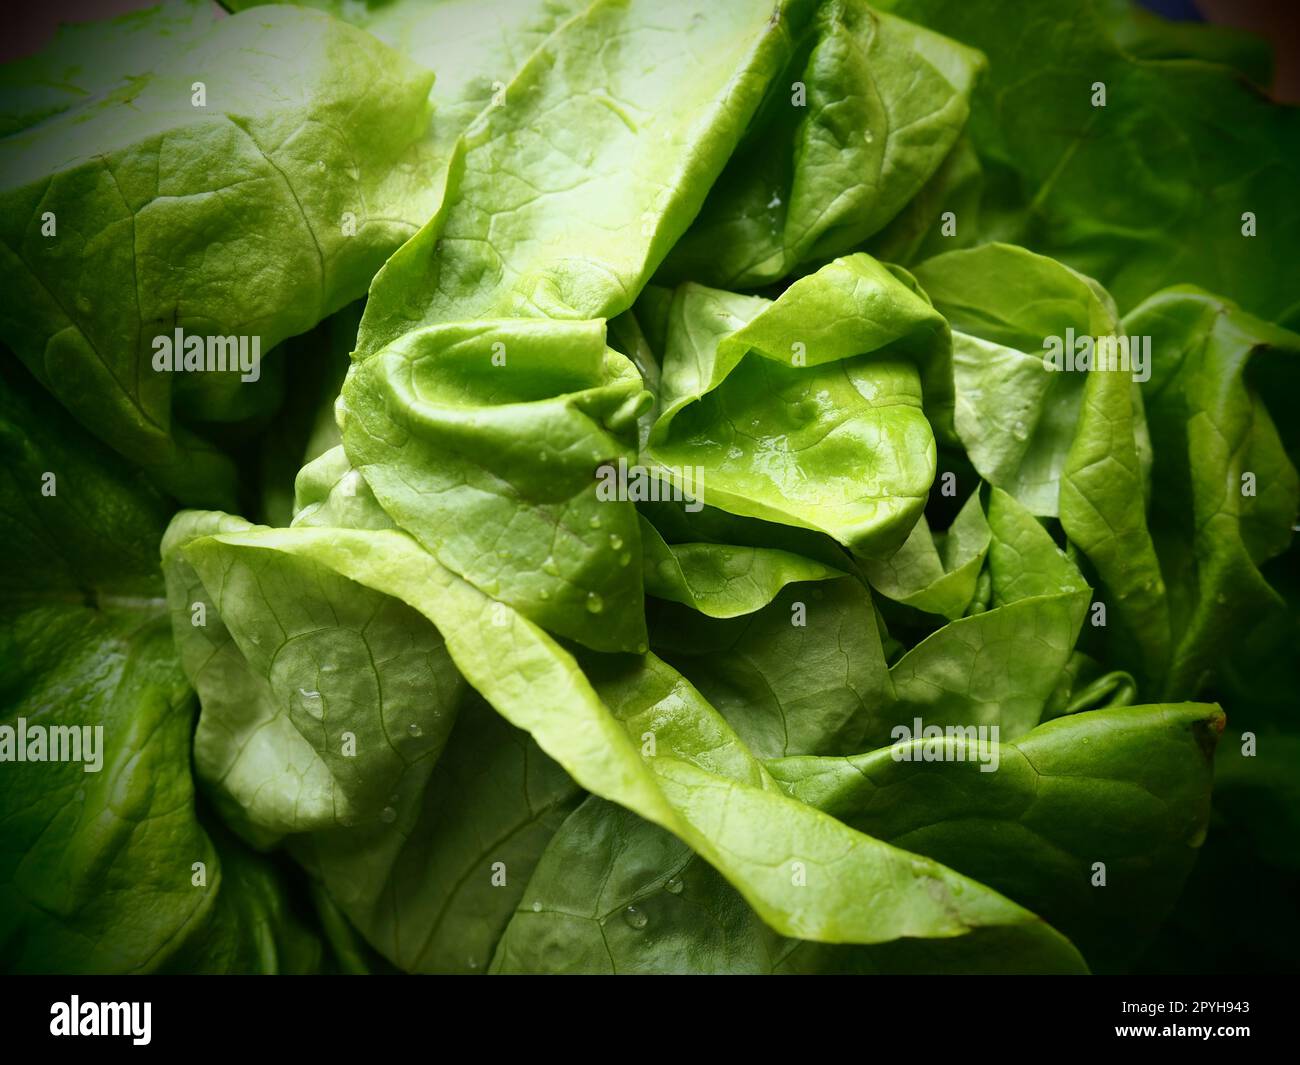 lettuce. An annual herb of the genus Lettuce of the Asteraceae family. Delicious fortified leaves. Green salad or side dish. Fresh herbs for healthy eating Stock Photo